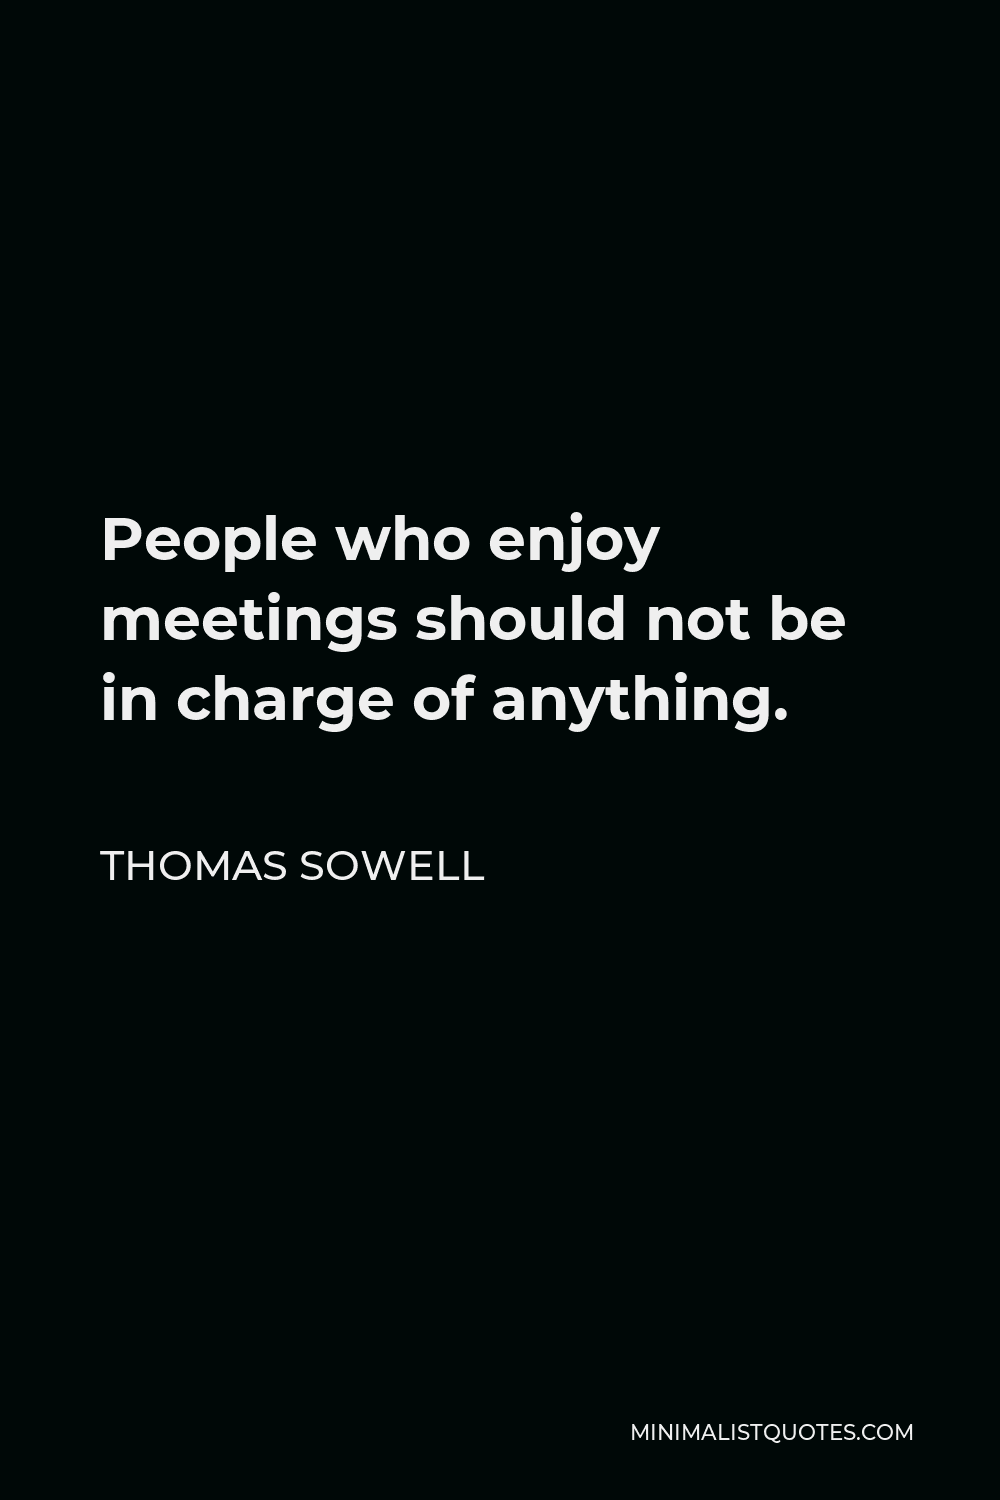 Thomas Sowell Quote - People who enjoy meetings should not be in charge of anything.